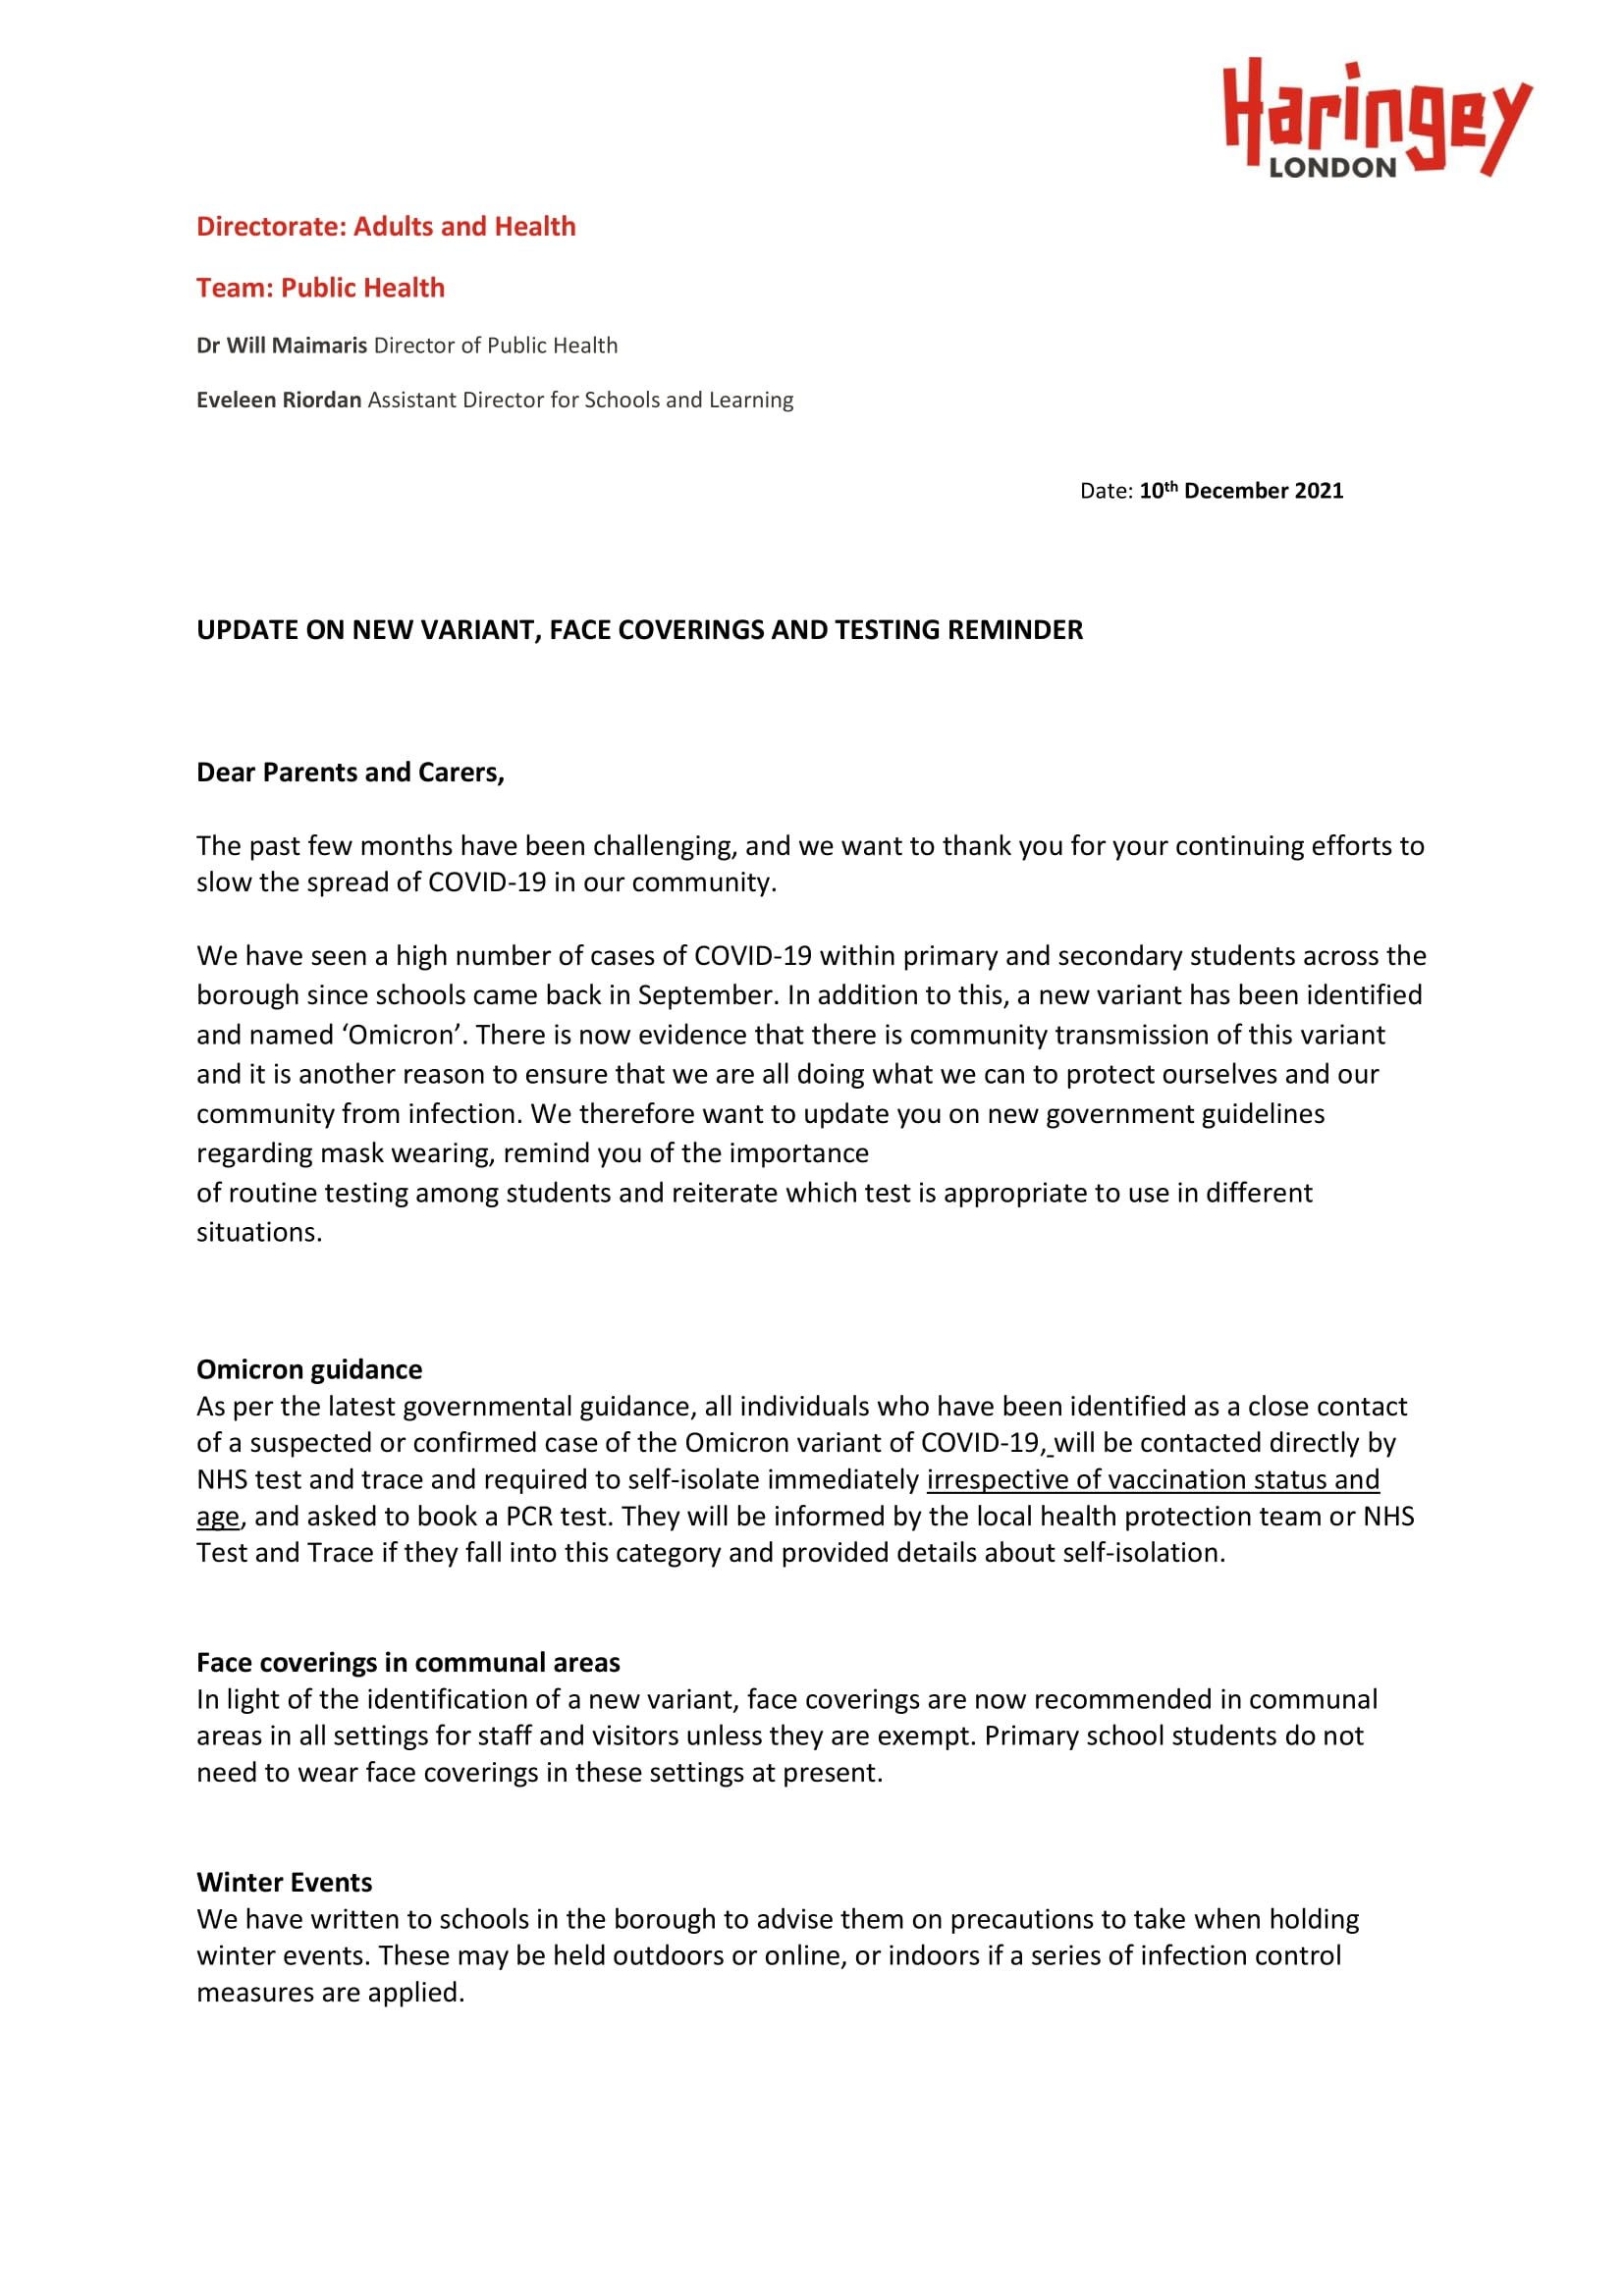 important-covid19-update-letter-from-haringey-council-earlsmead